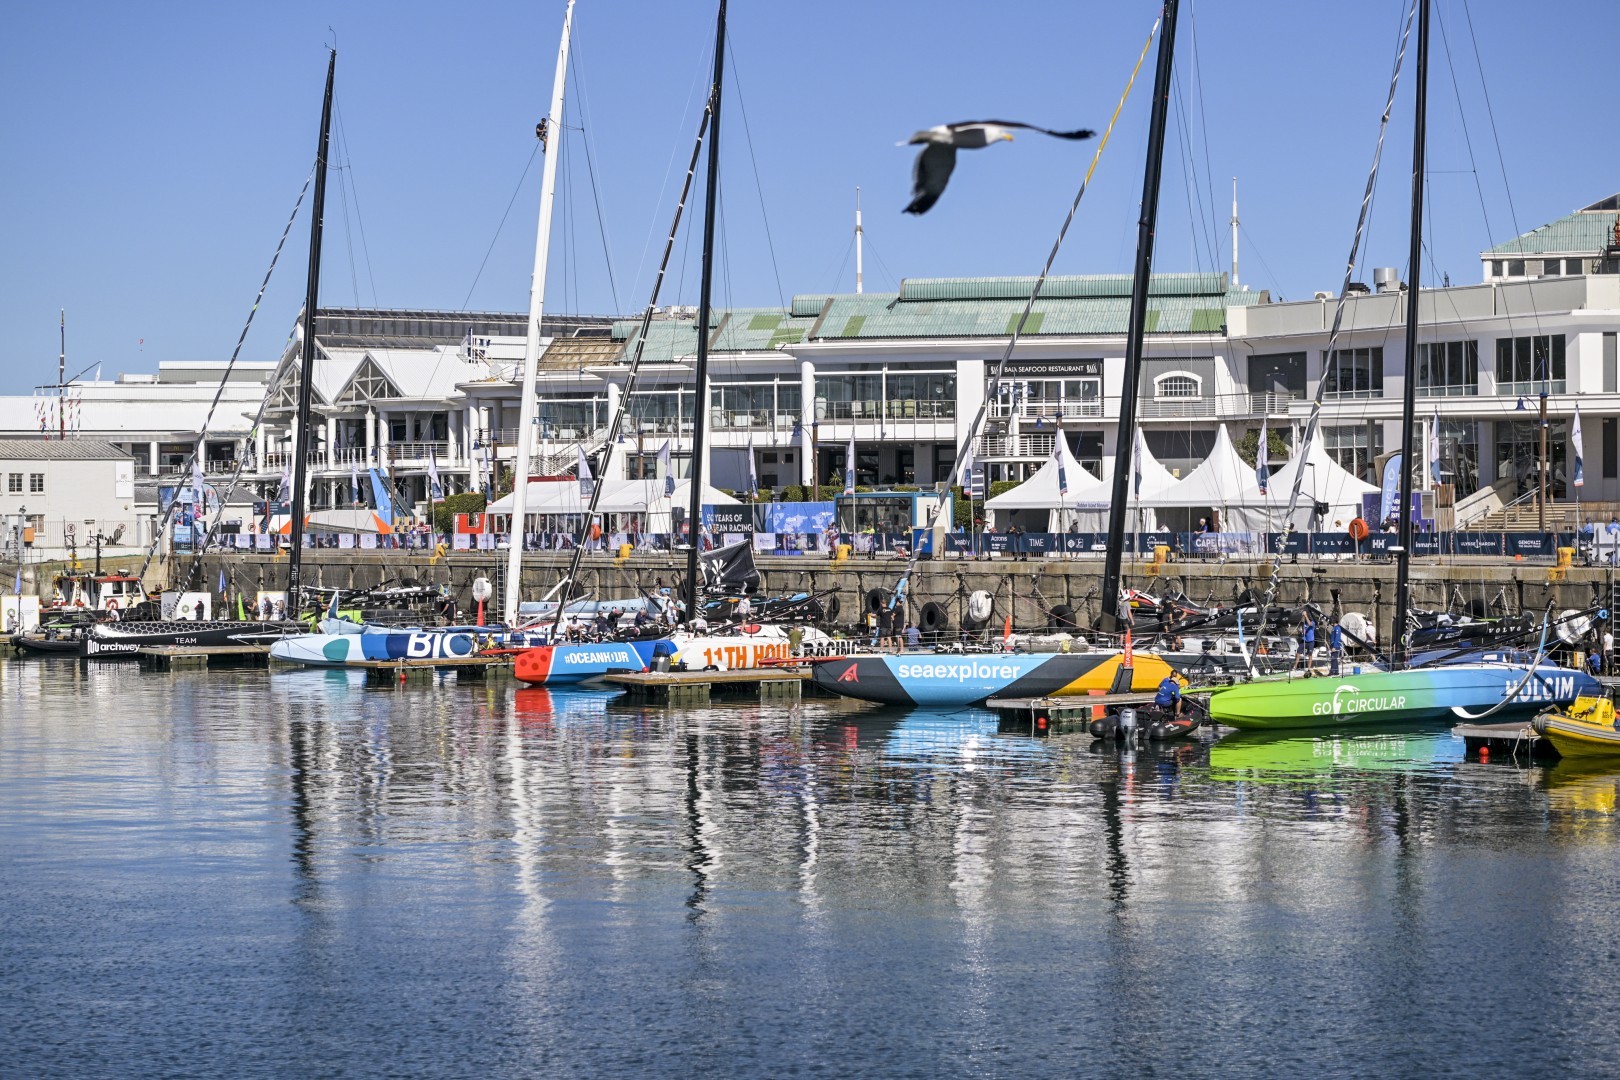 Imoca fleet moored in the pontoon at the Ocean Live Park in Cape Town.
© Sailing Energy / The Ocean Race